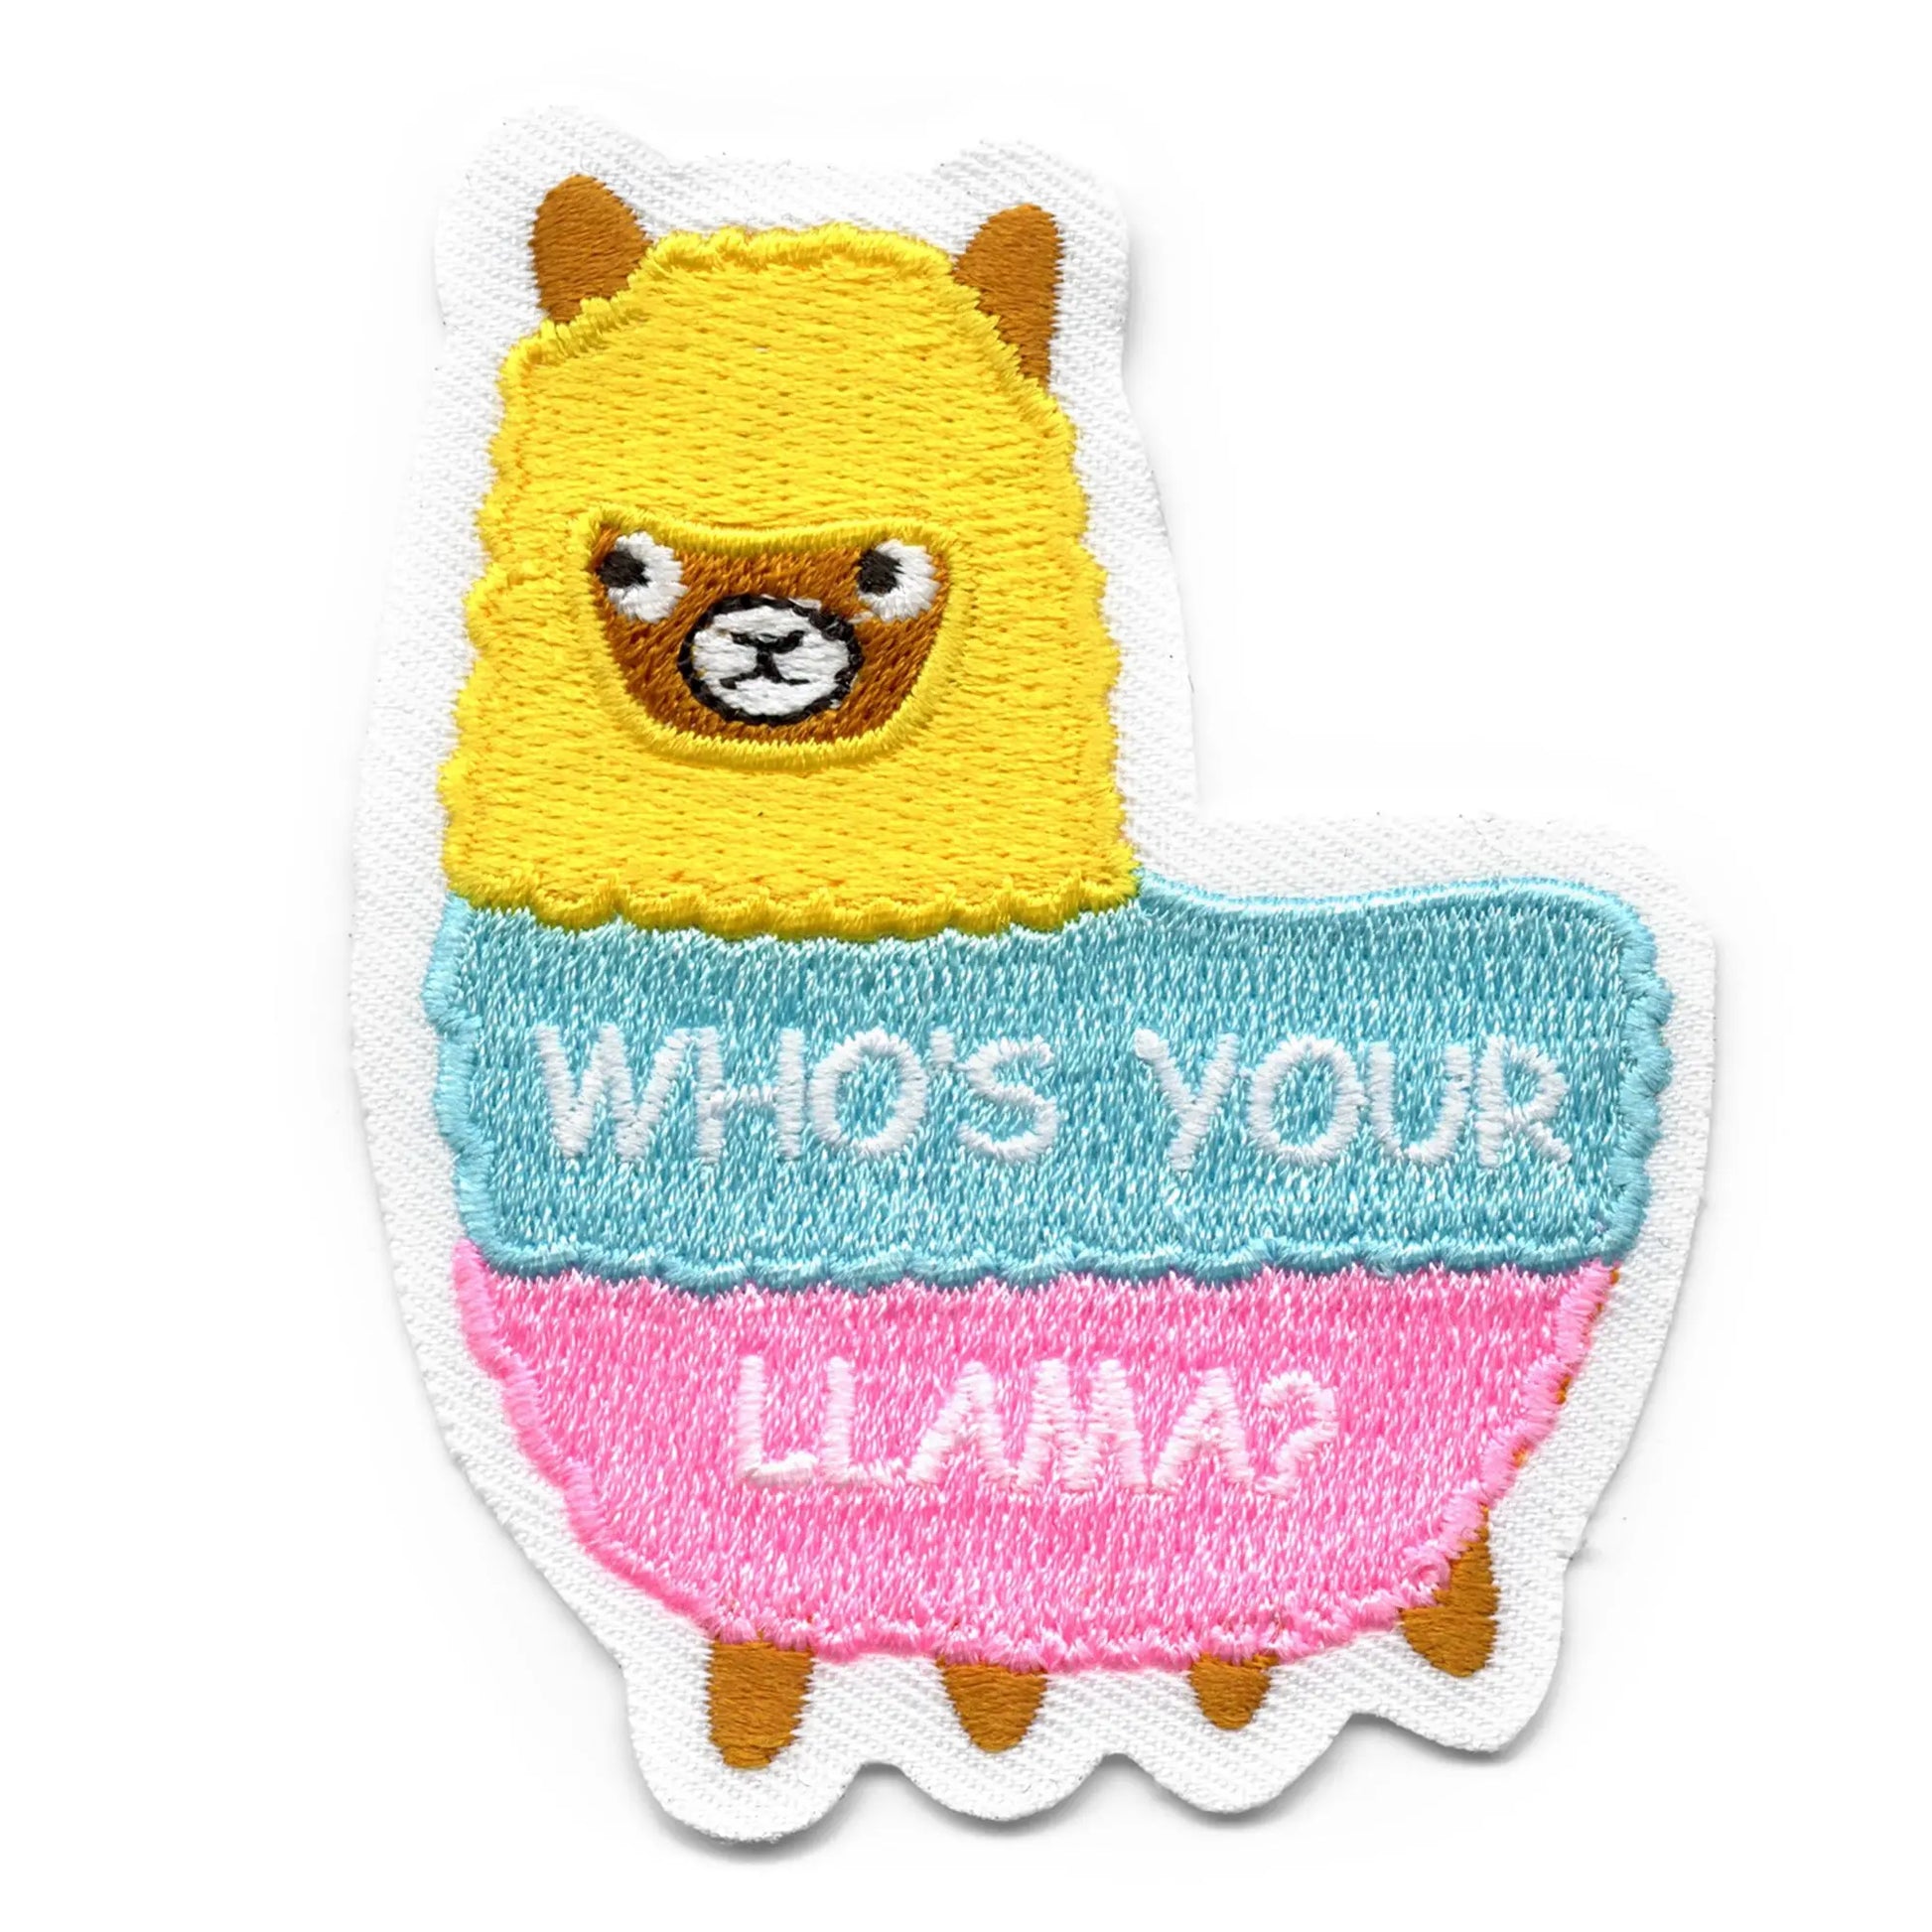 Festive "Who's Your Llama" Llama Embroidered Iron-on Patch 